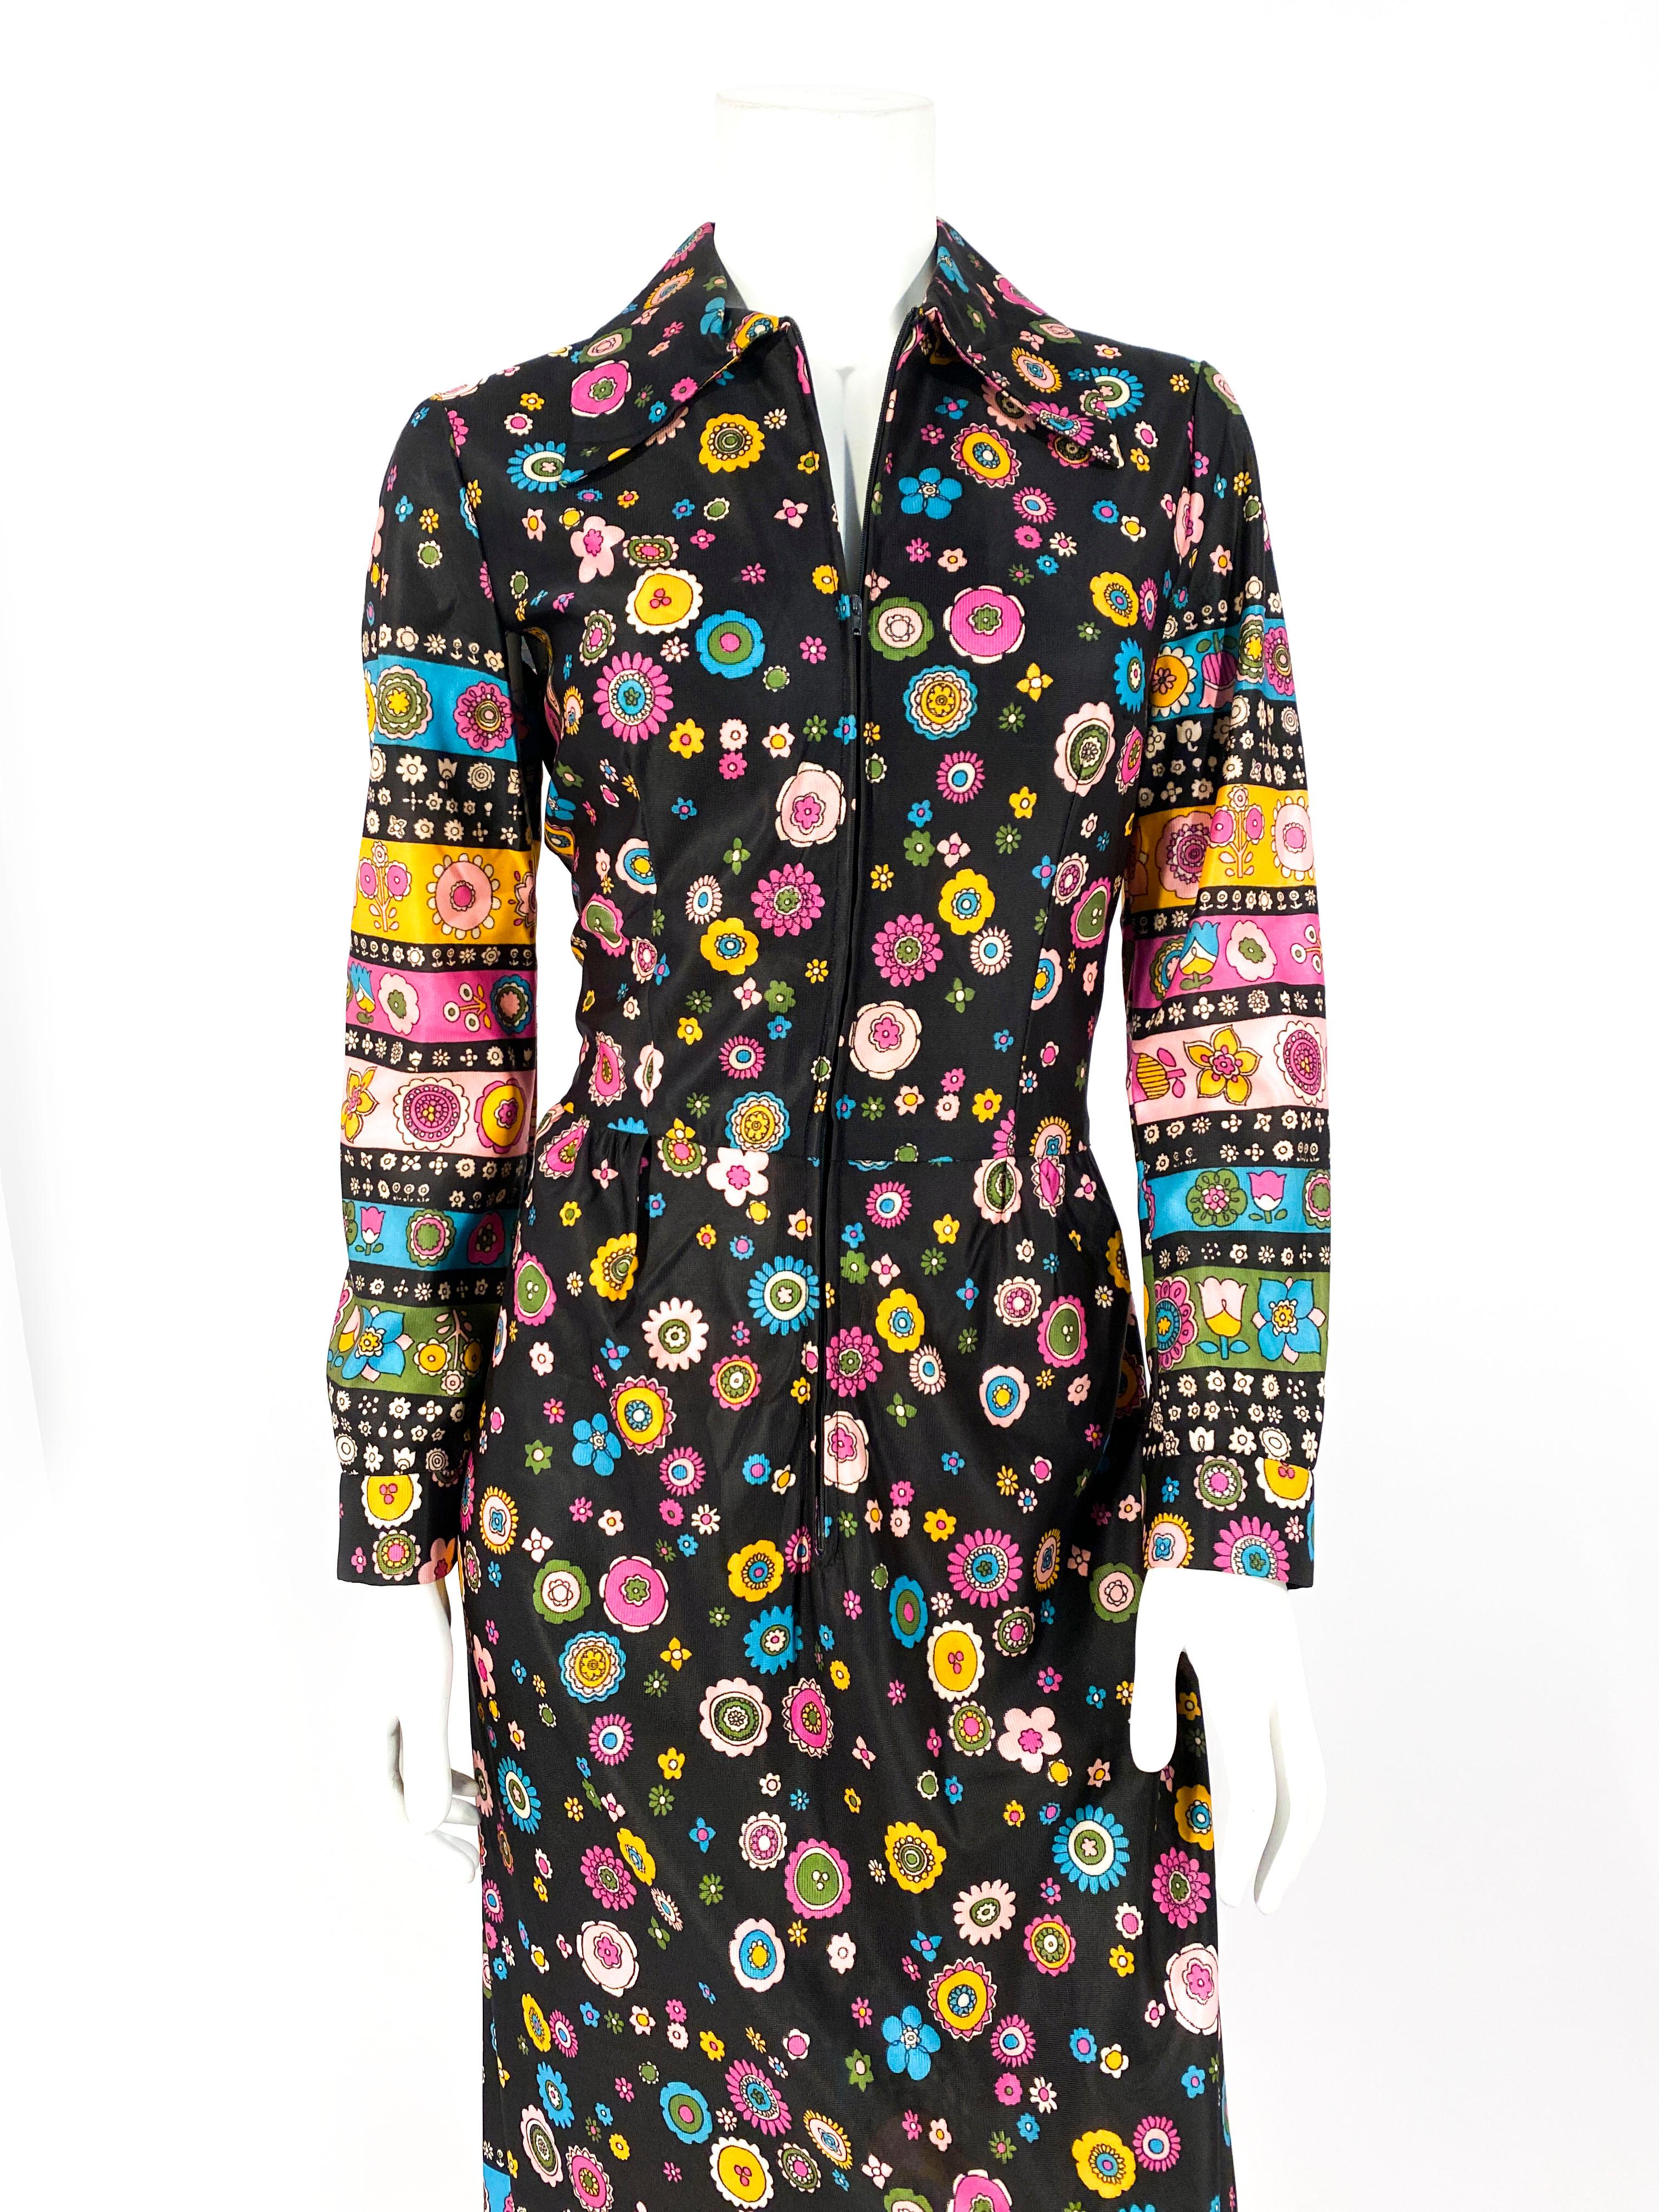 1970s printed polyester dress featuring a geometric floral print in tones of light blue, yellow, pinks and whites on a black background color. The print has several layers of boarder print along the full cuffed sleeves and at the hem on the bottom